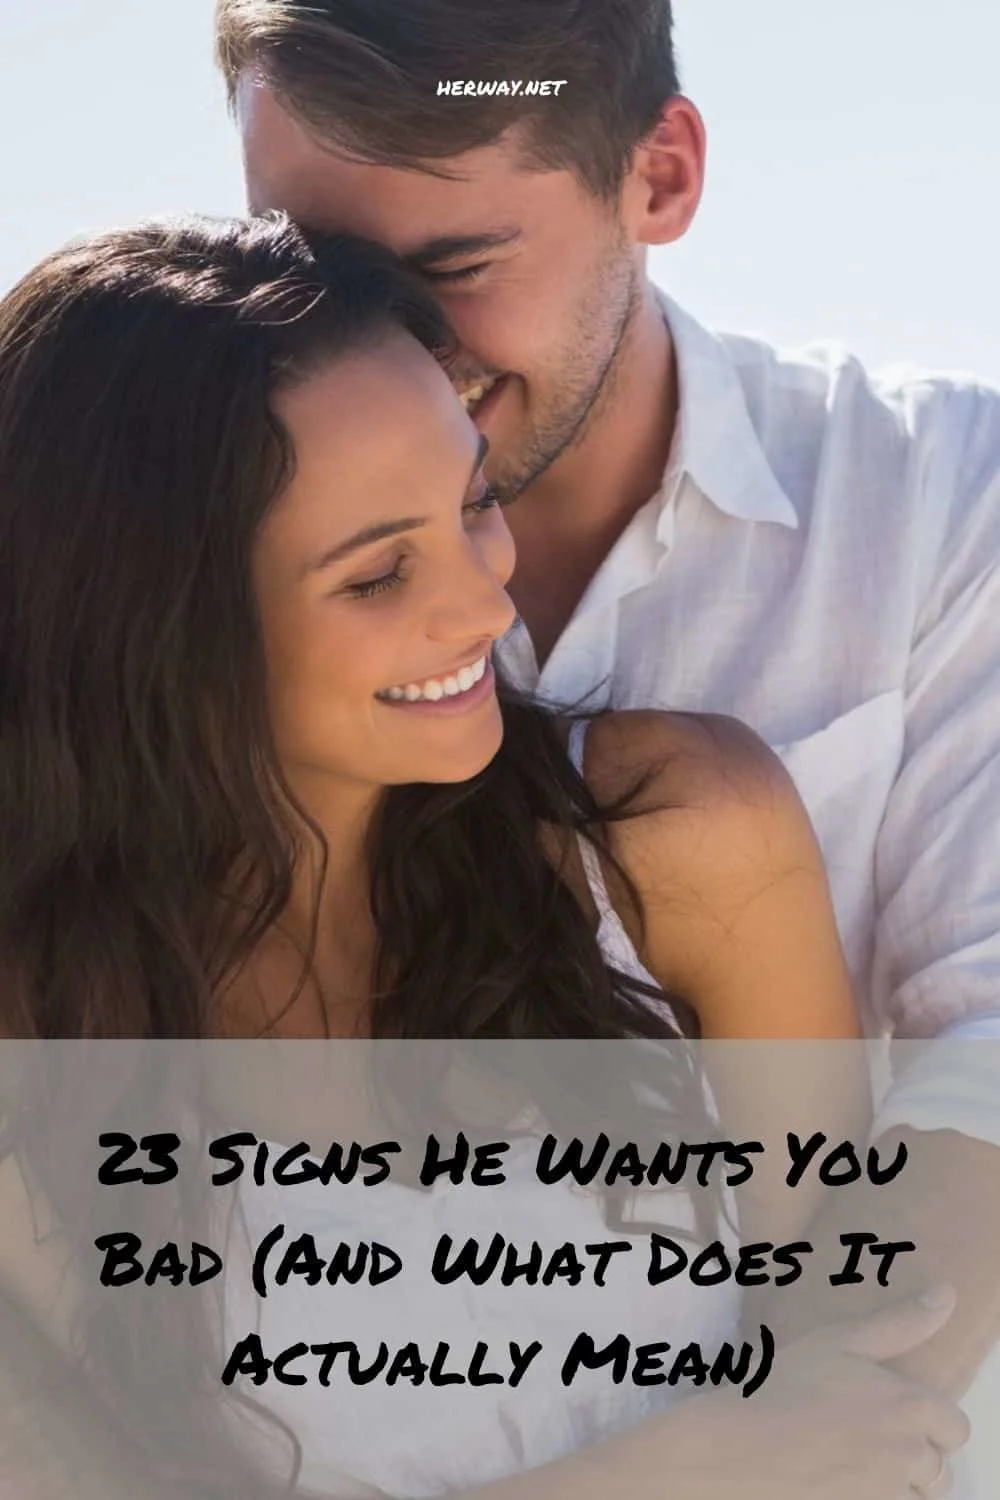 Signs he desires you